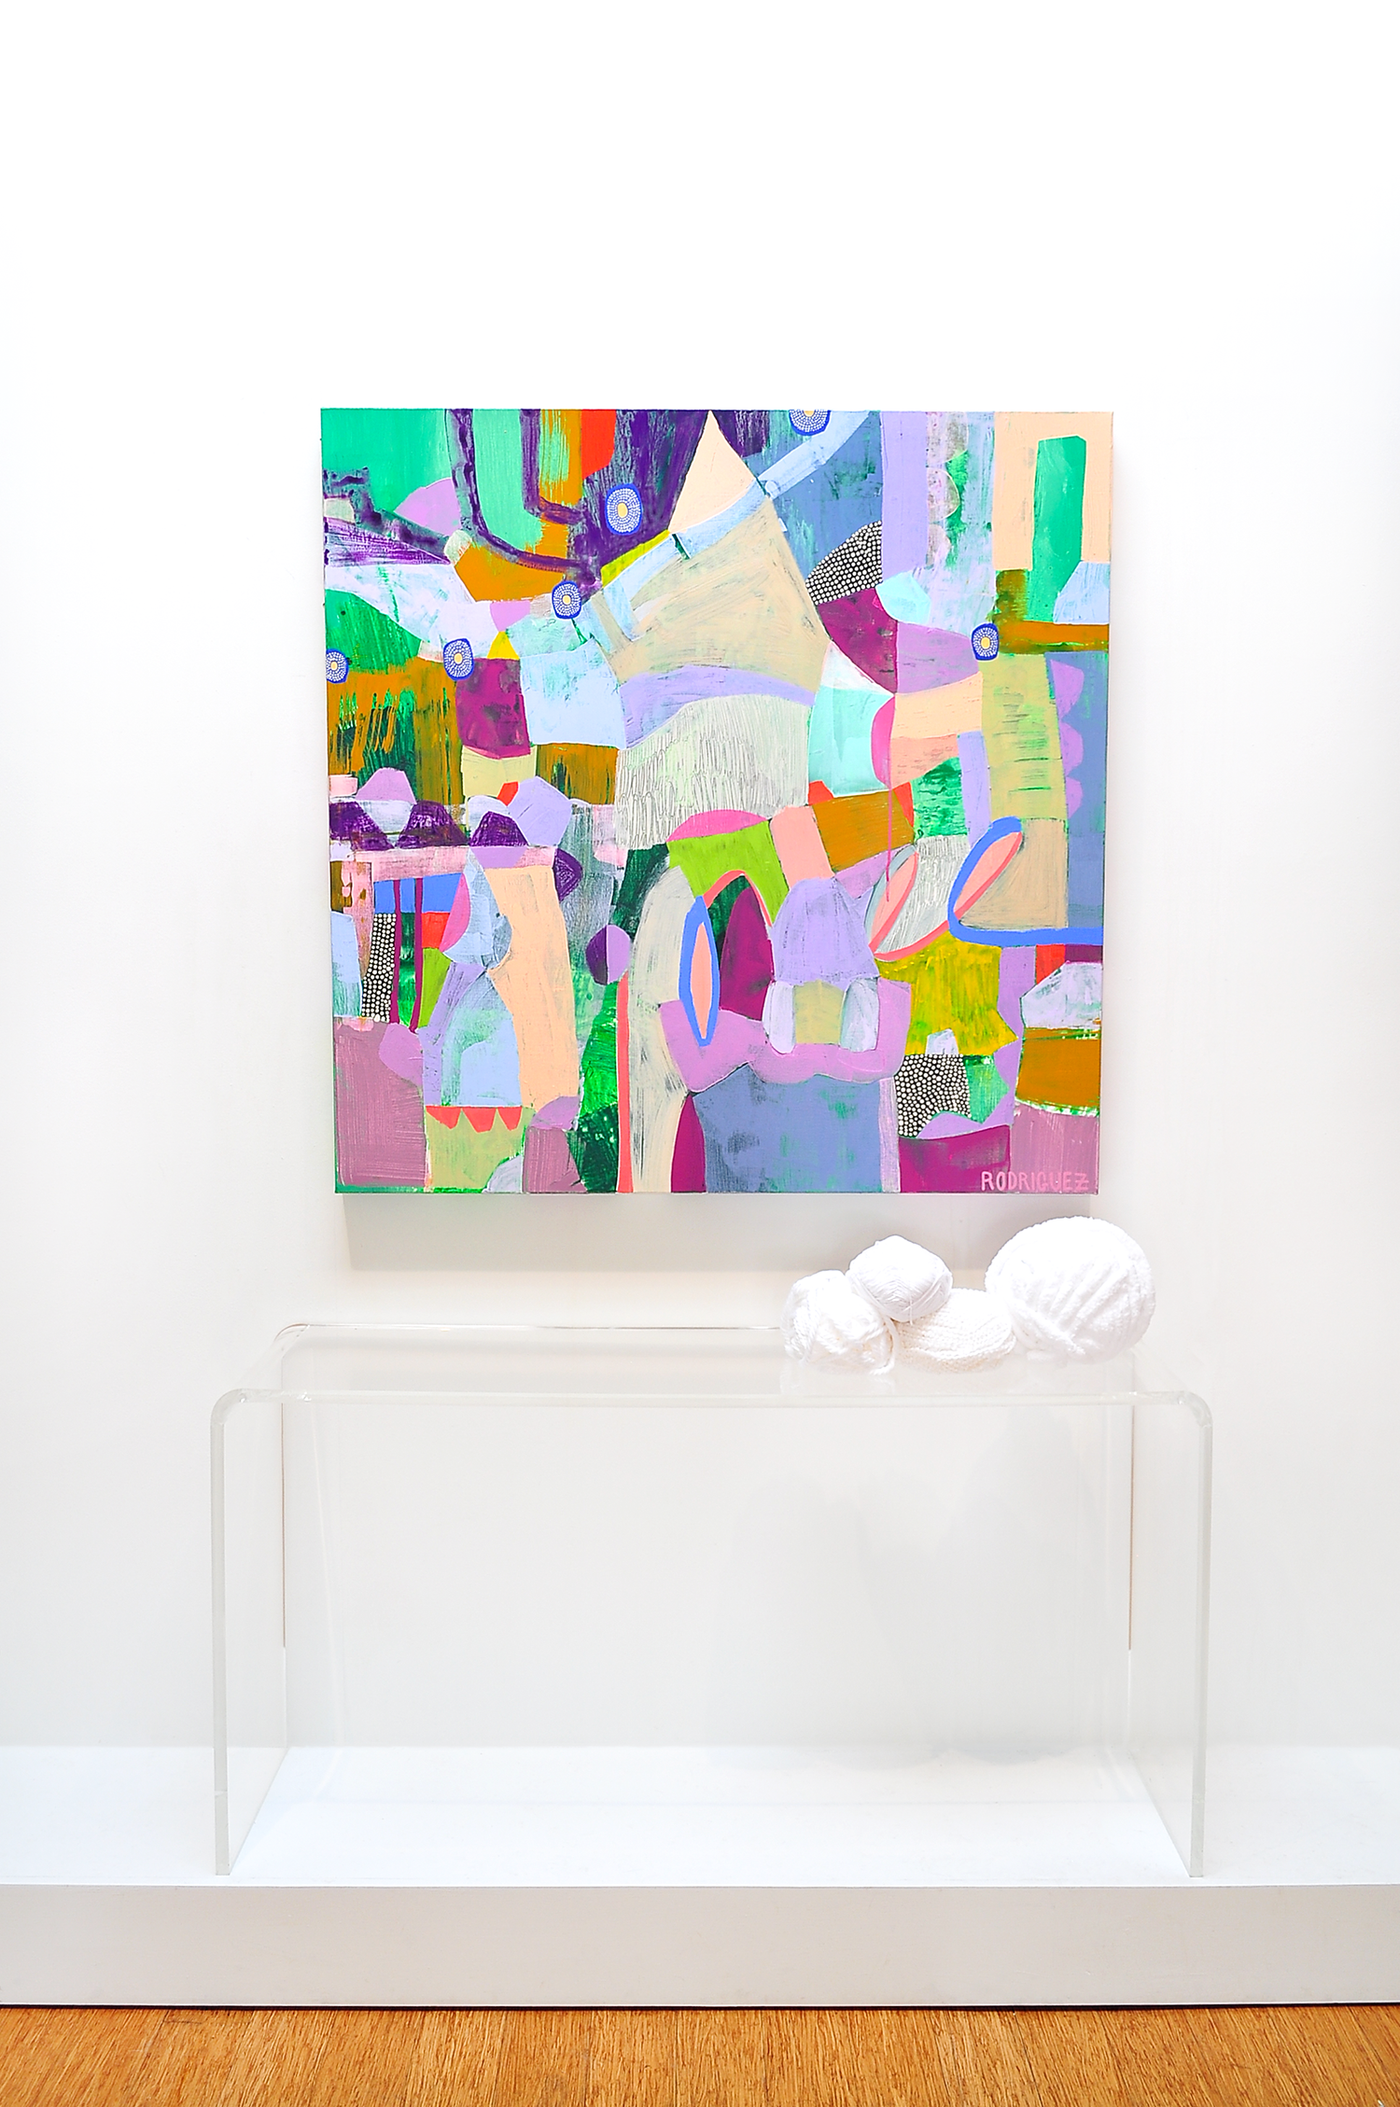 Singing Along To Our Favorite Song - 48x48 on Canvas